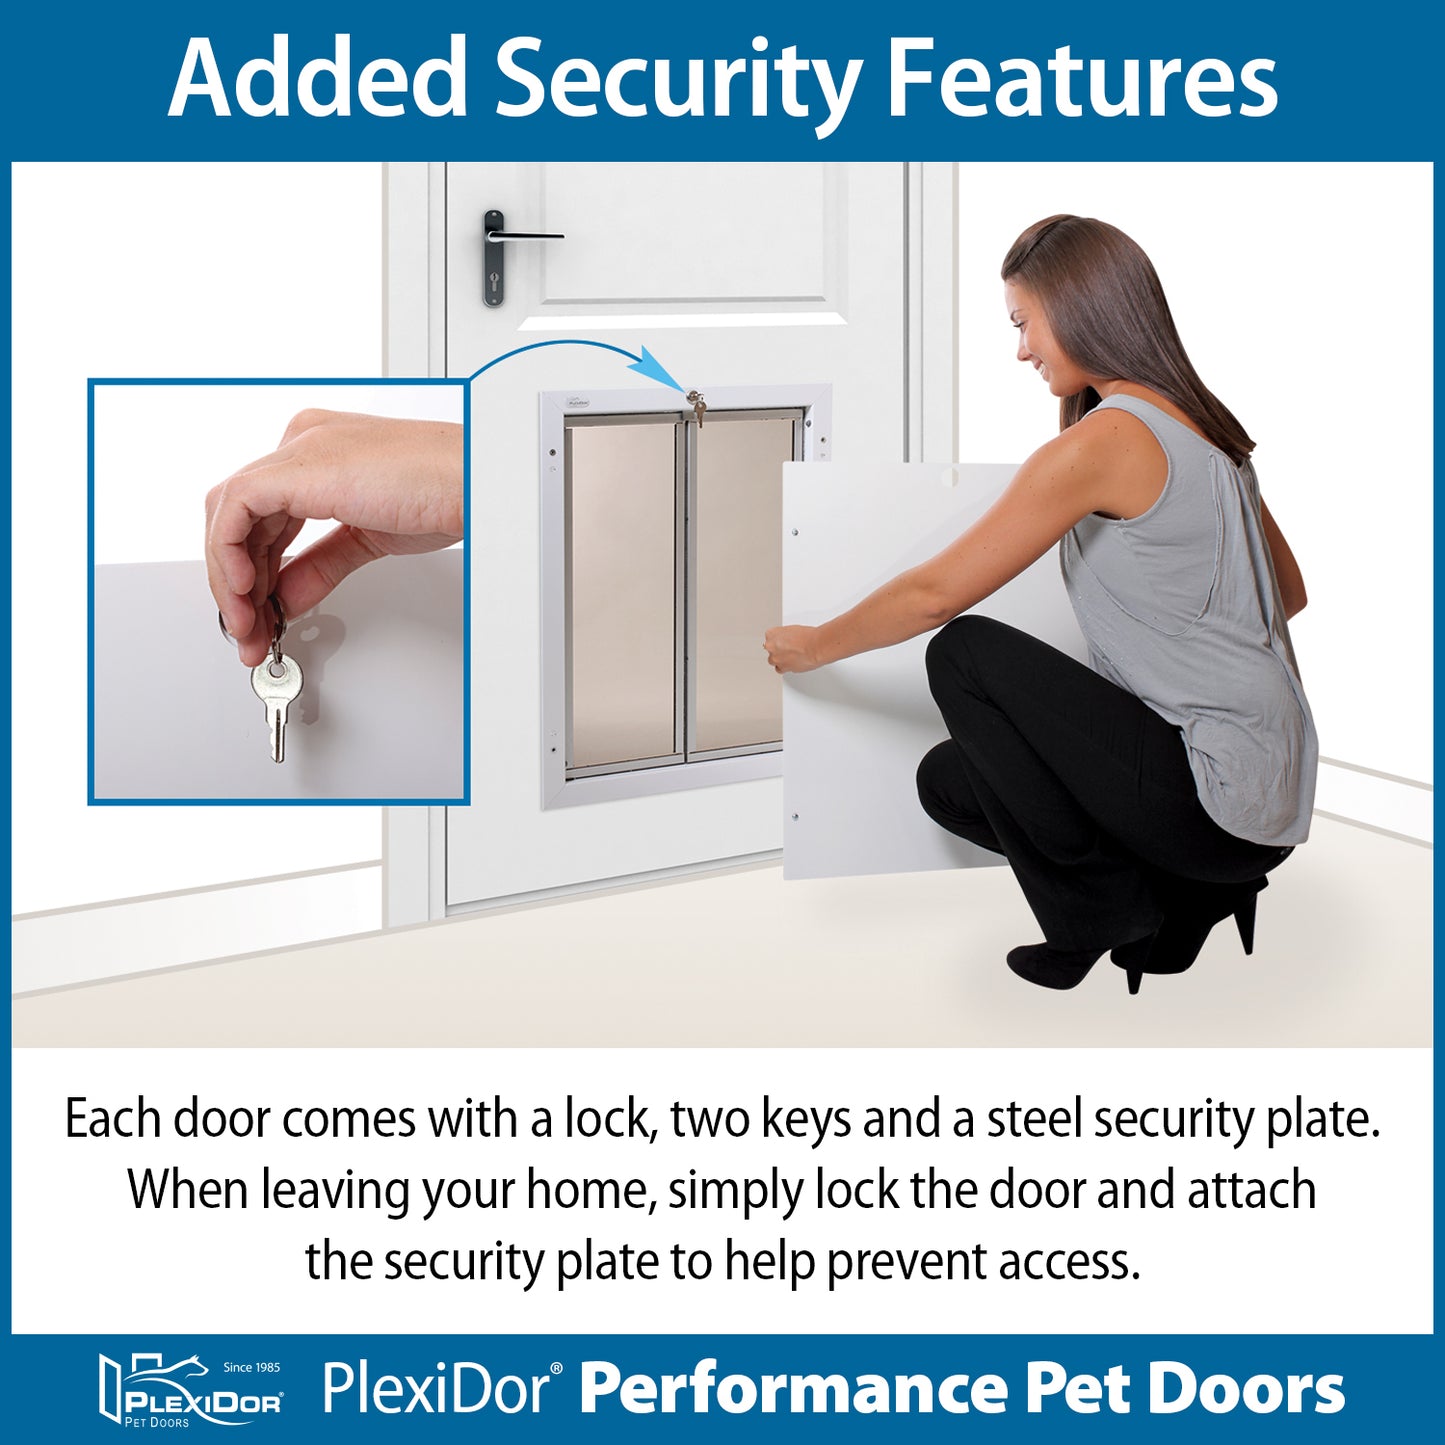 PlexiDor - Extra Large Dog Door - Wall Series (Contact Us for availability and delivery quote)